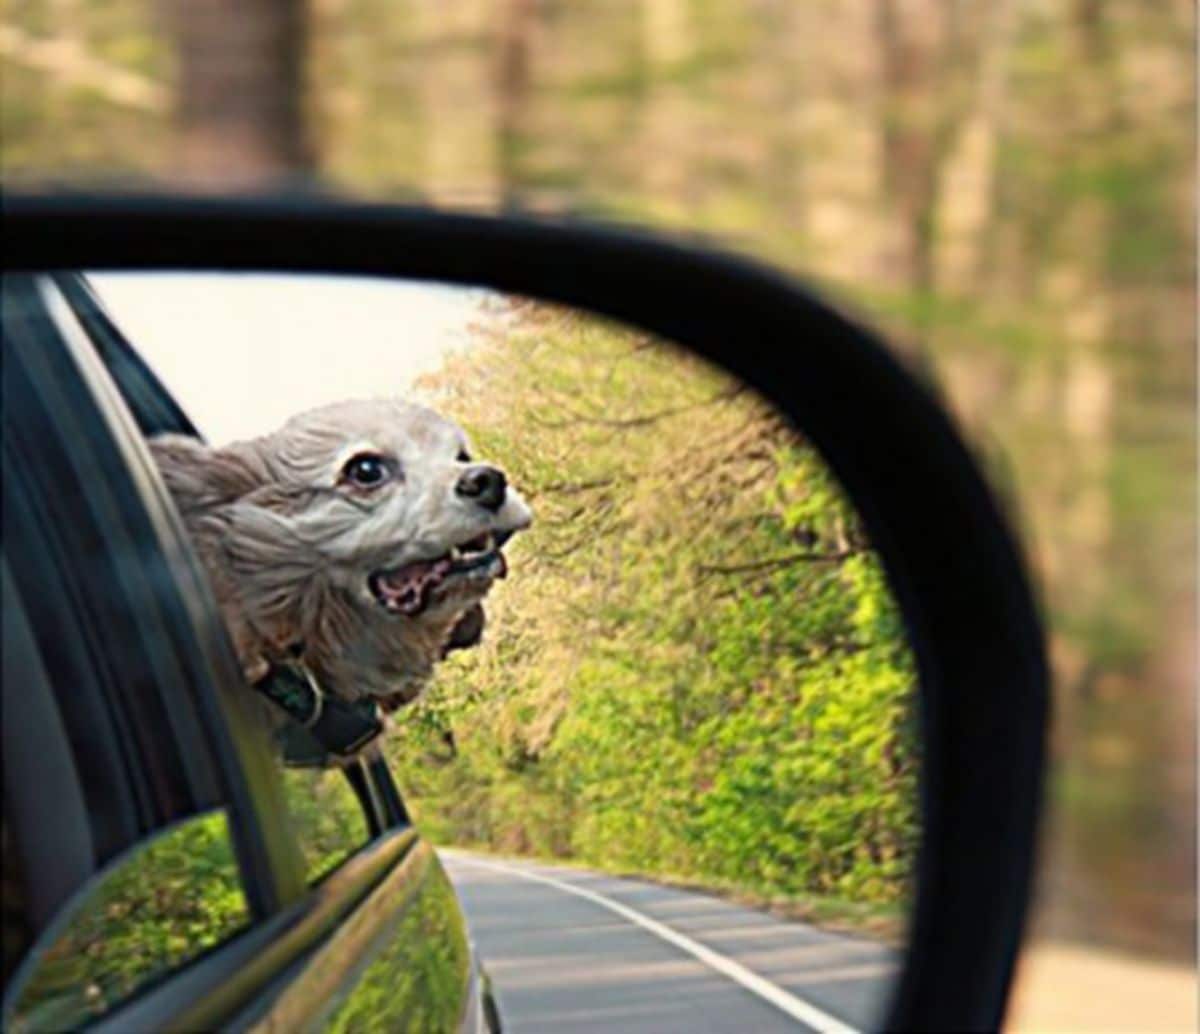 brown and white dog sticking the head out of a window seen through a side mirror